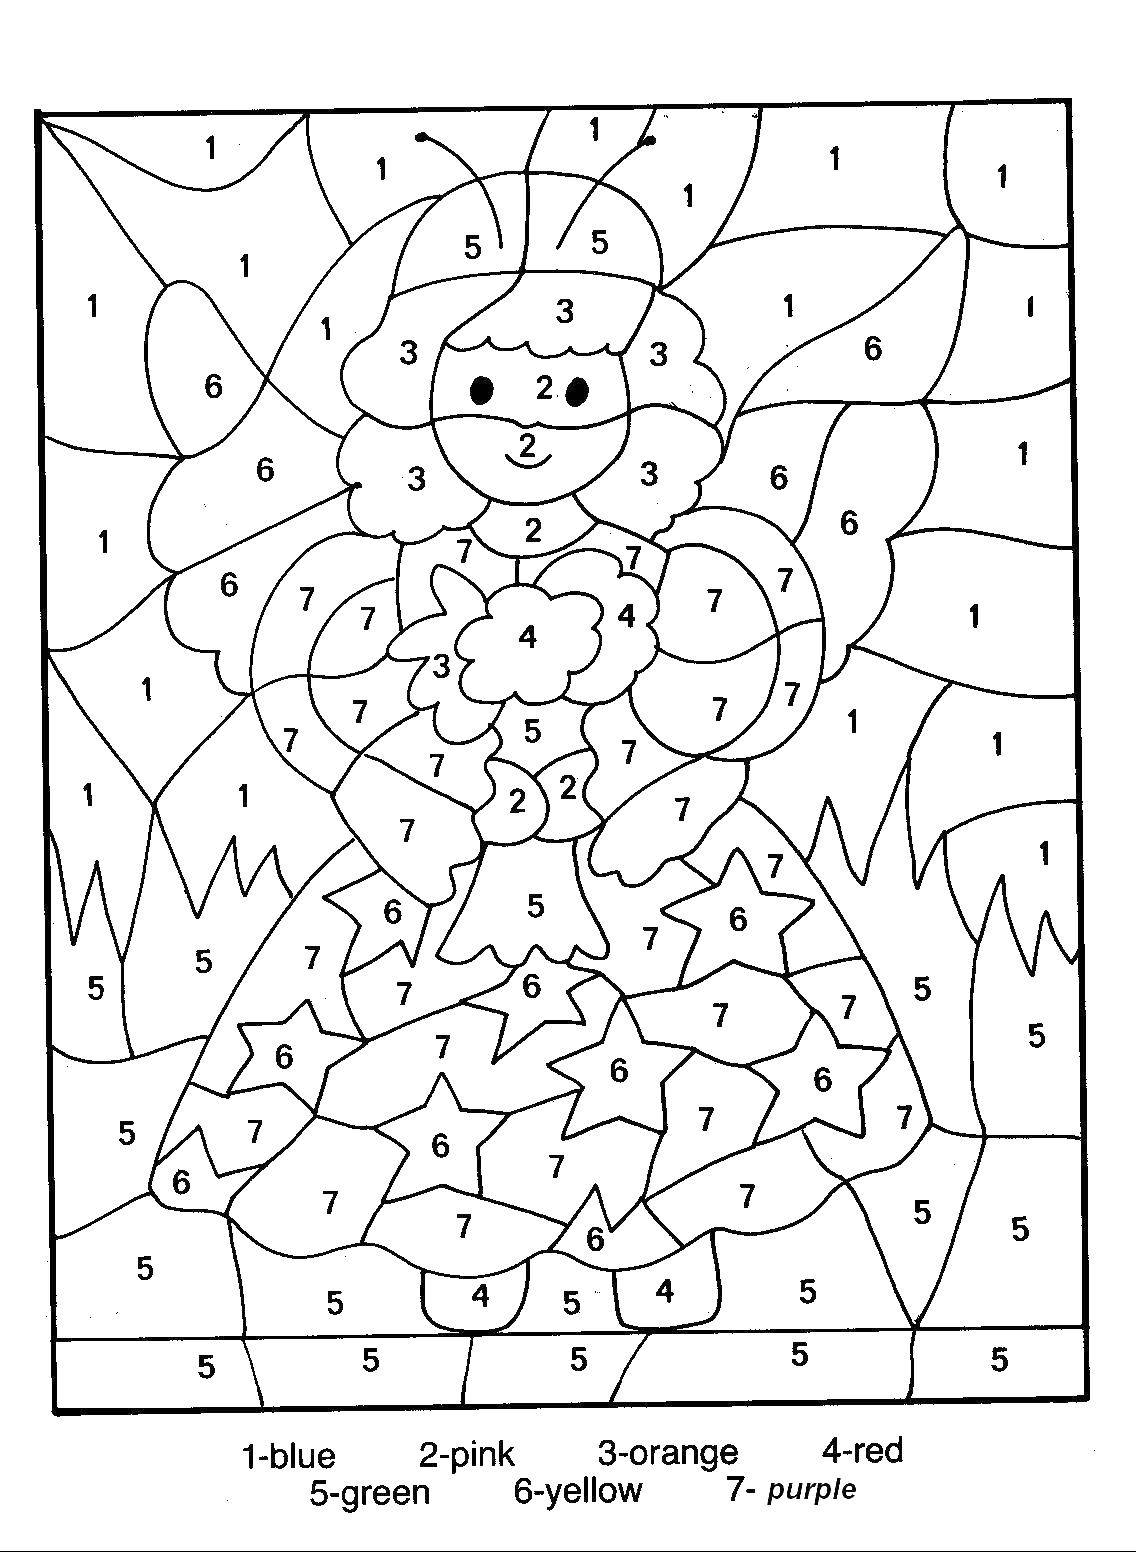 Coloring Paint a fairy. Category coloring by numbers. Tags:  numbers, fairy, coloring pages.